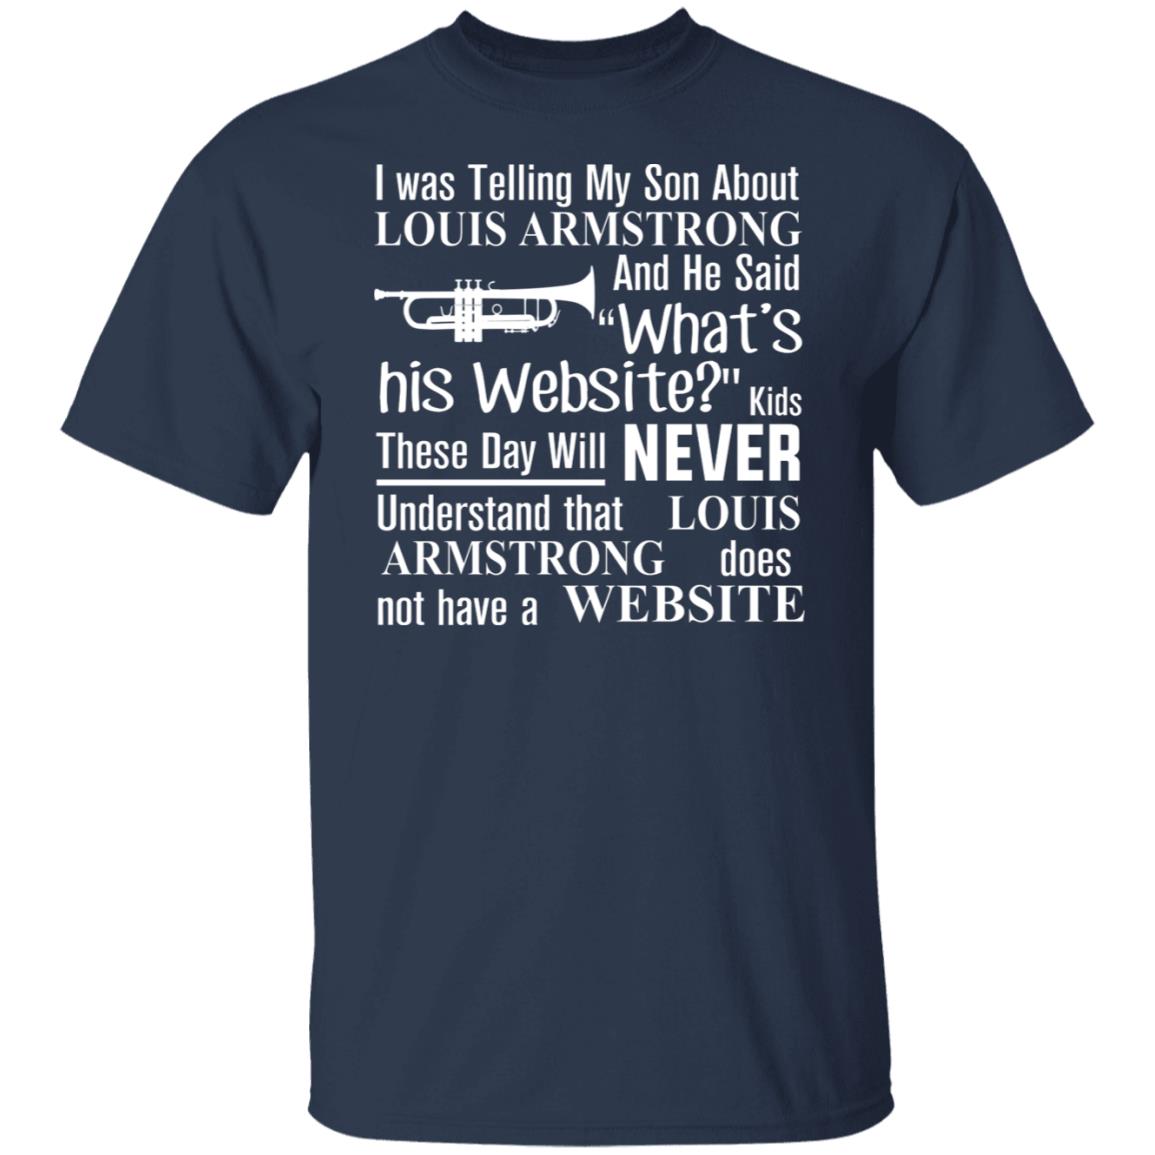 I Was Telling My Son About Louis Armstrong T-Shirts, Hoodies, Sweatshirt